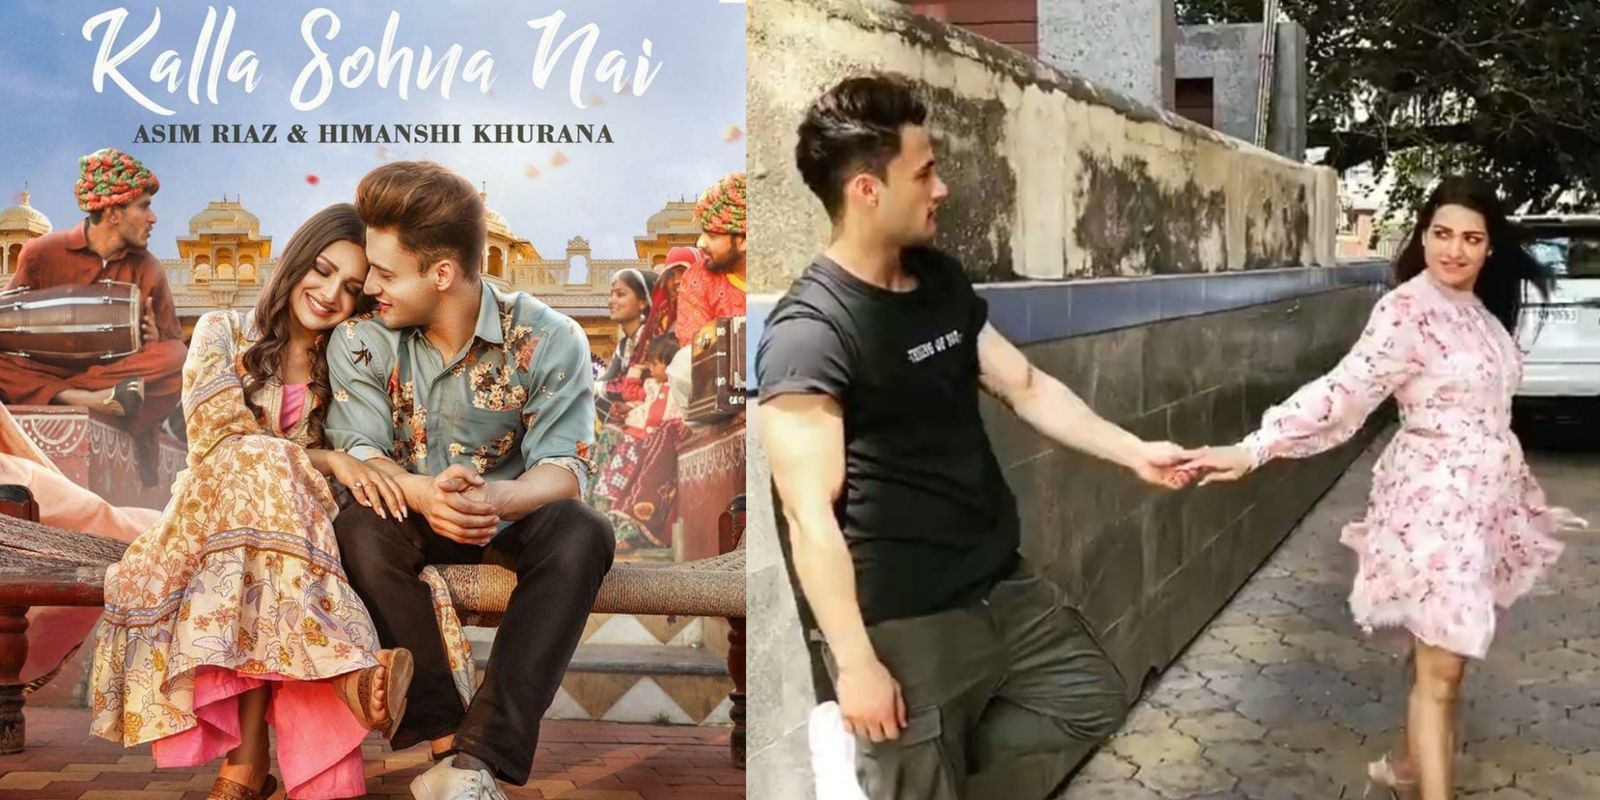 Asim Riaz Teases Fans With A Special Video Featuring Himanshi Khurana Ahead Of Kalla Sohna Nai’s Release